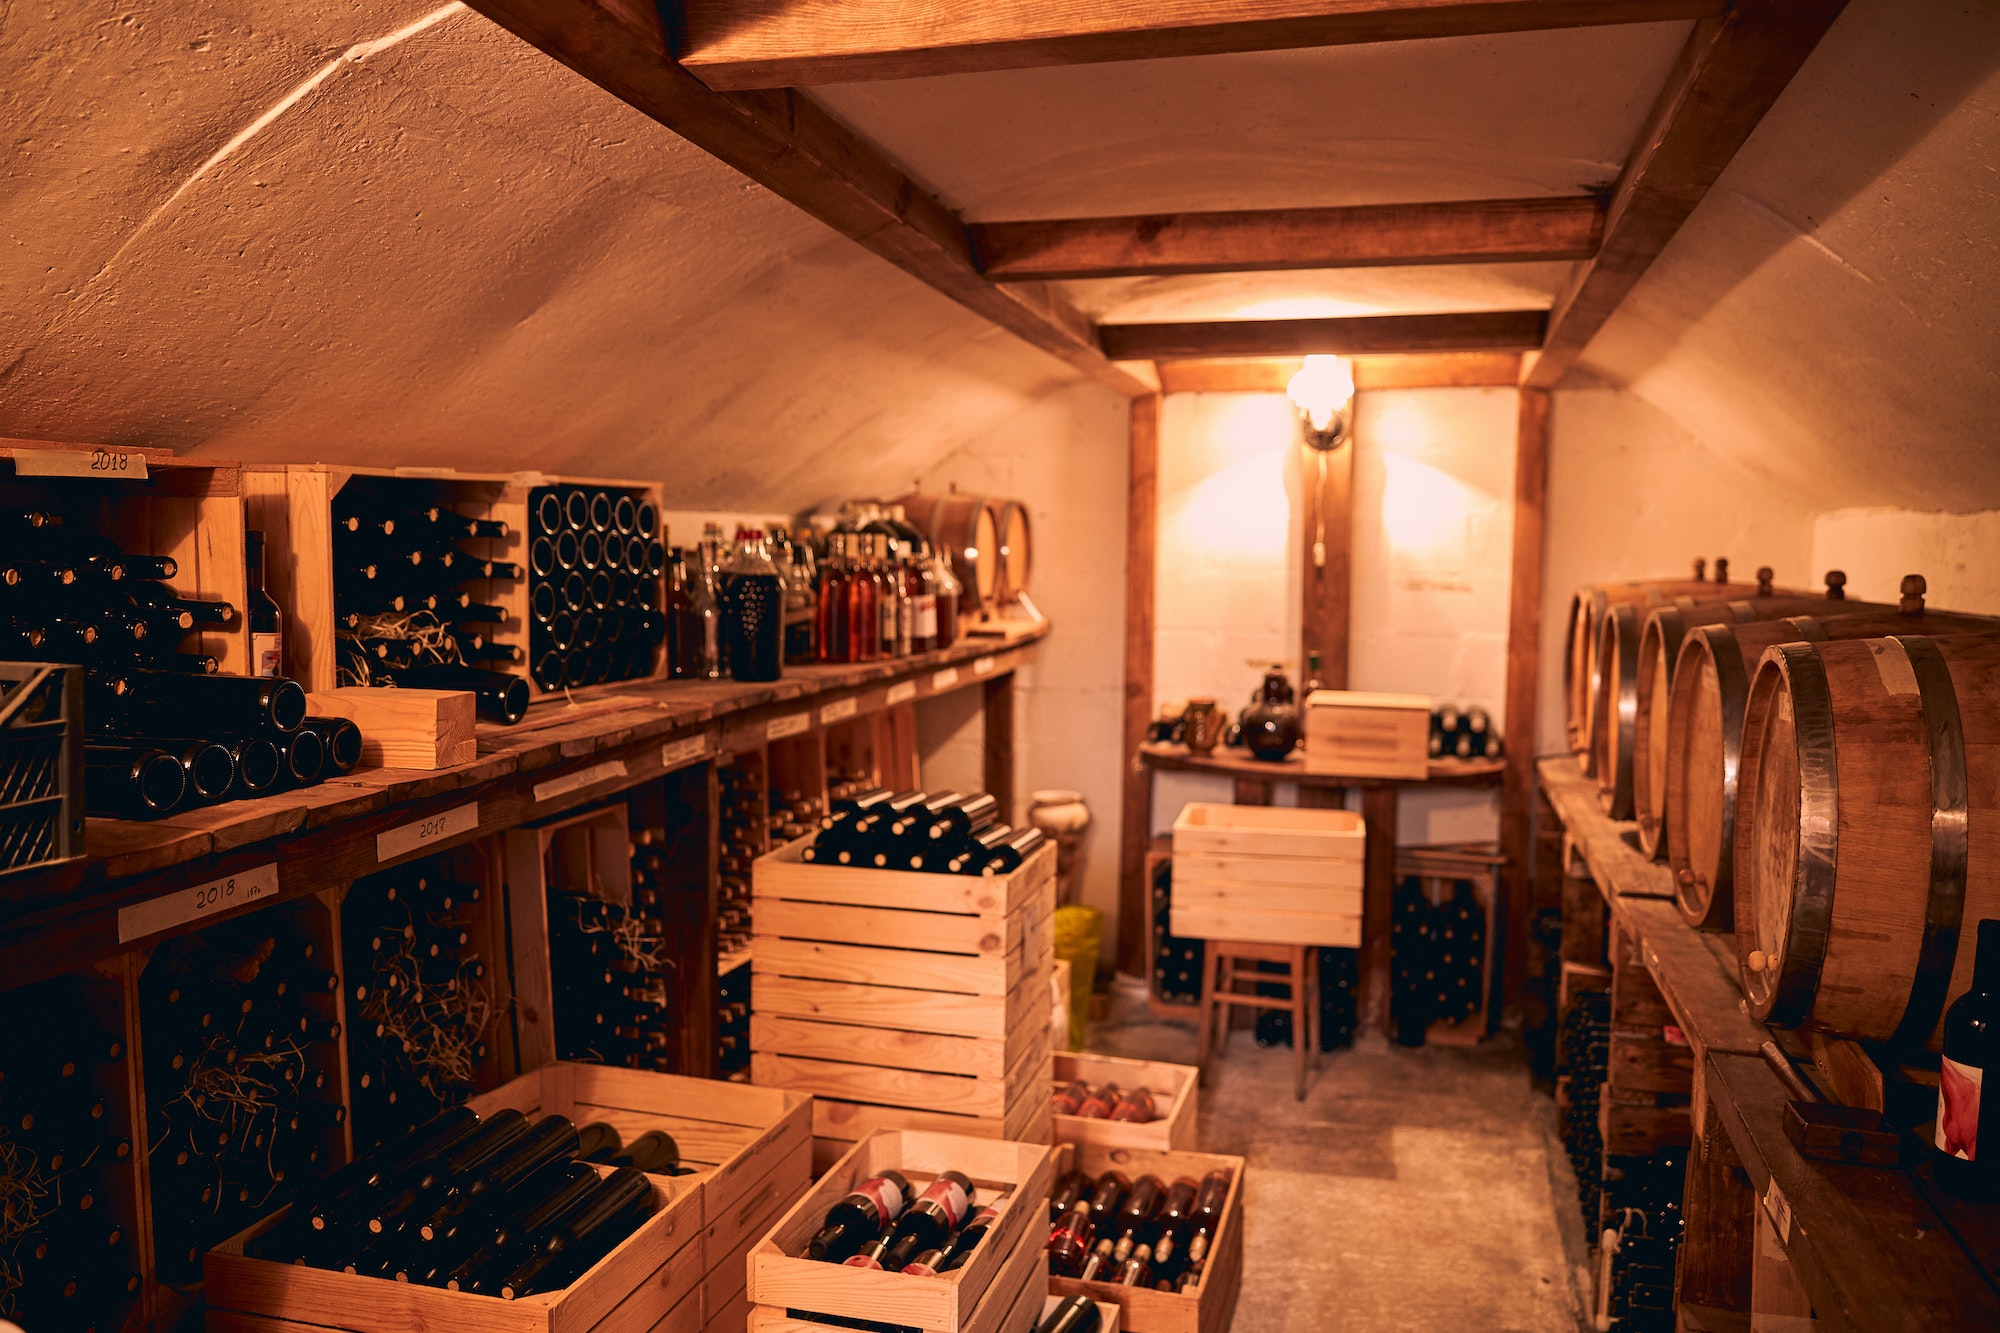 Storage room with wine in bottles and barrels